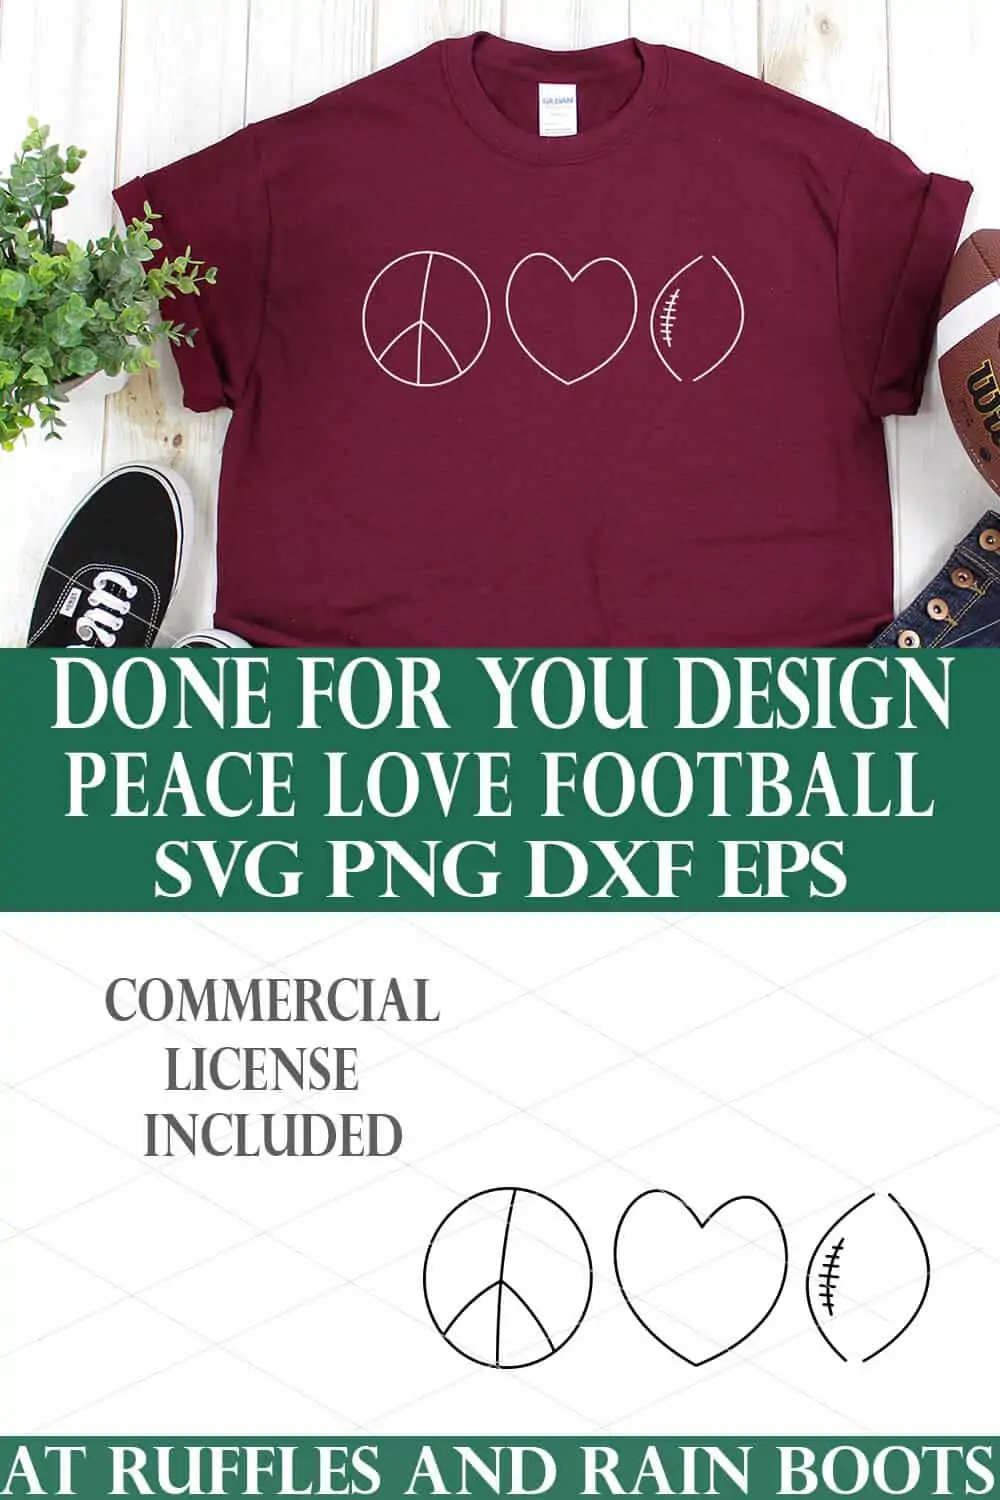 vertical collage of peace love football svg on maroon t shirt on white background in hand drawn style from ruffles and rain boots made for cricut and silhouette cutting machines